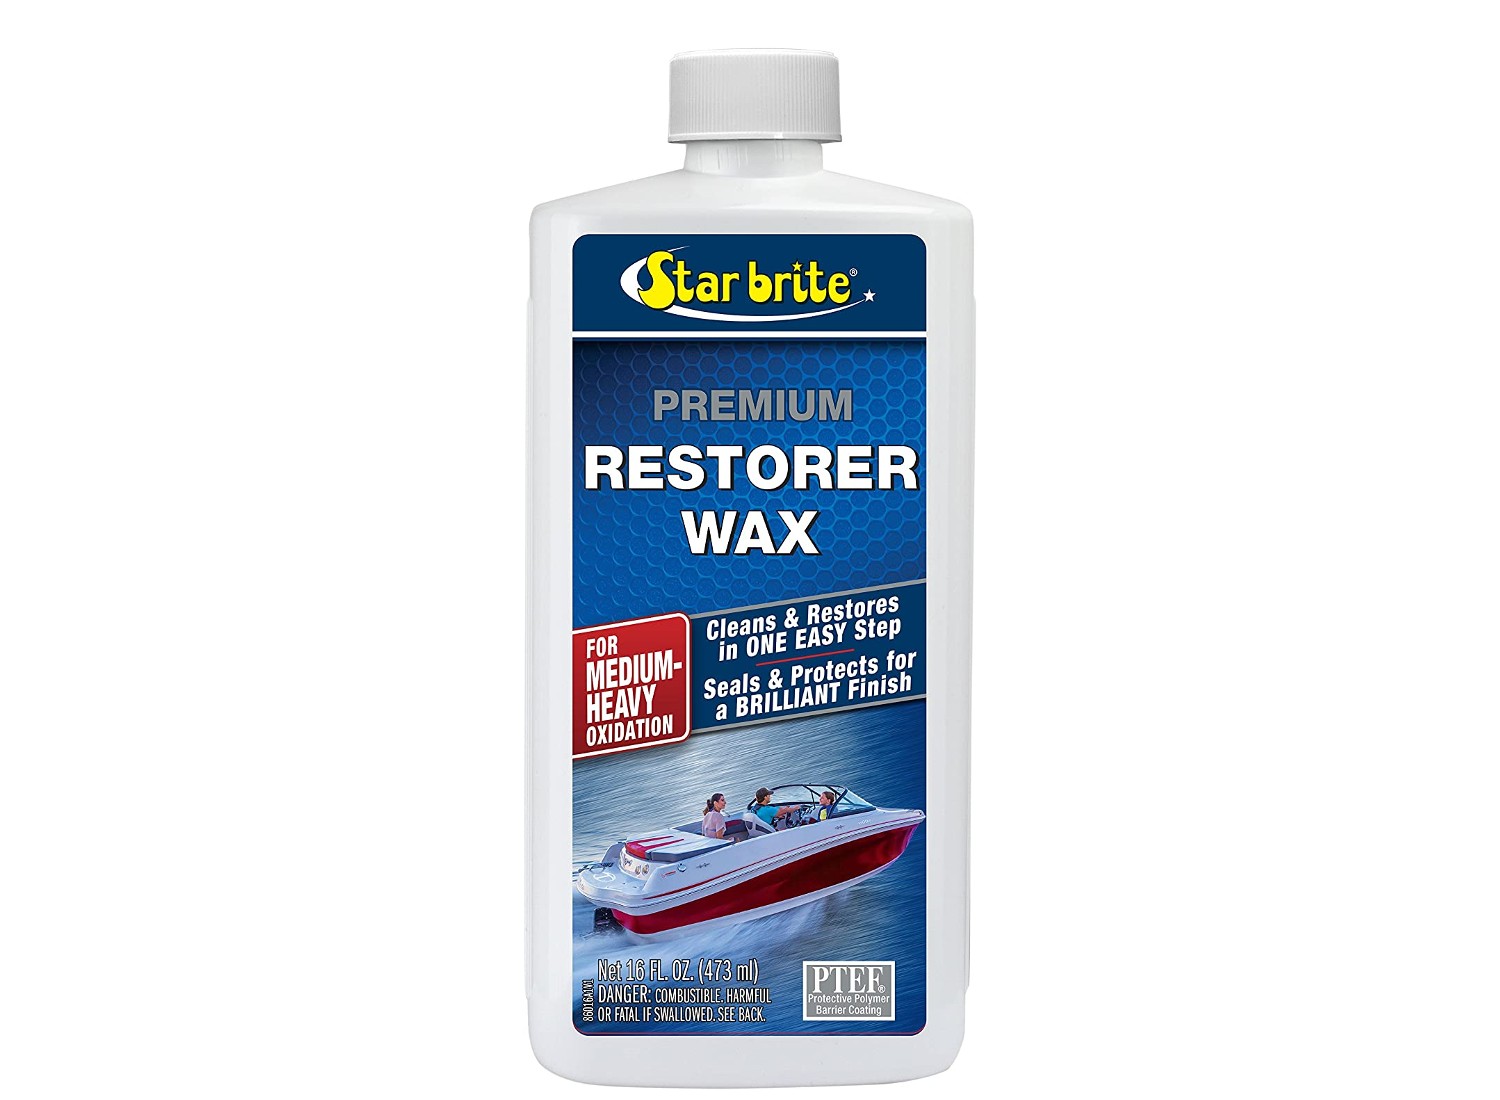 Star brite Premium Cleaner Wax 16 oz - Cleans, Shines & Protects Boat, RVs  - Carnauba Wax - For Vinyl & Plastic - Quick & Easy - Outdoor Wipes